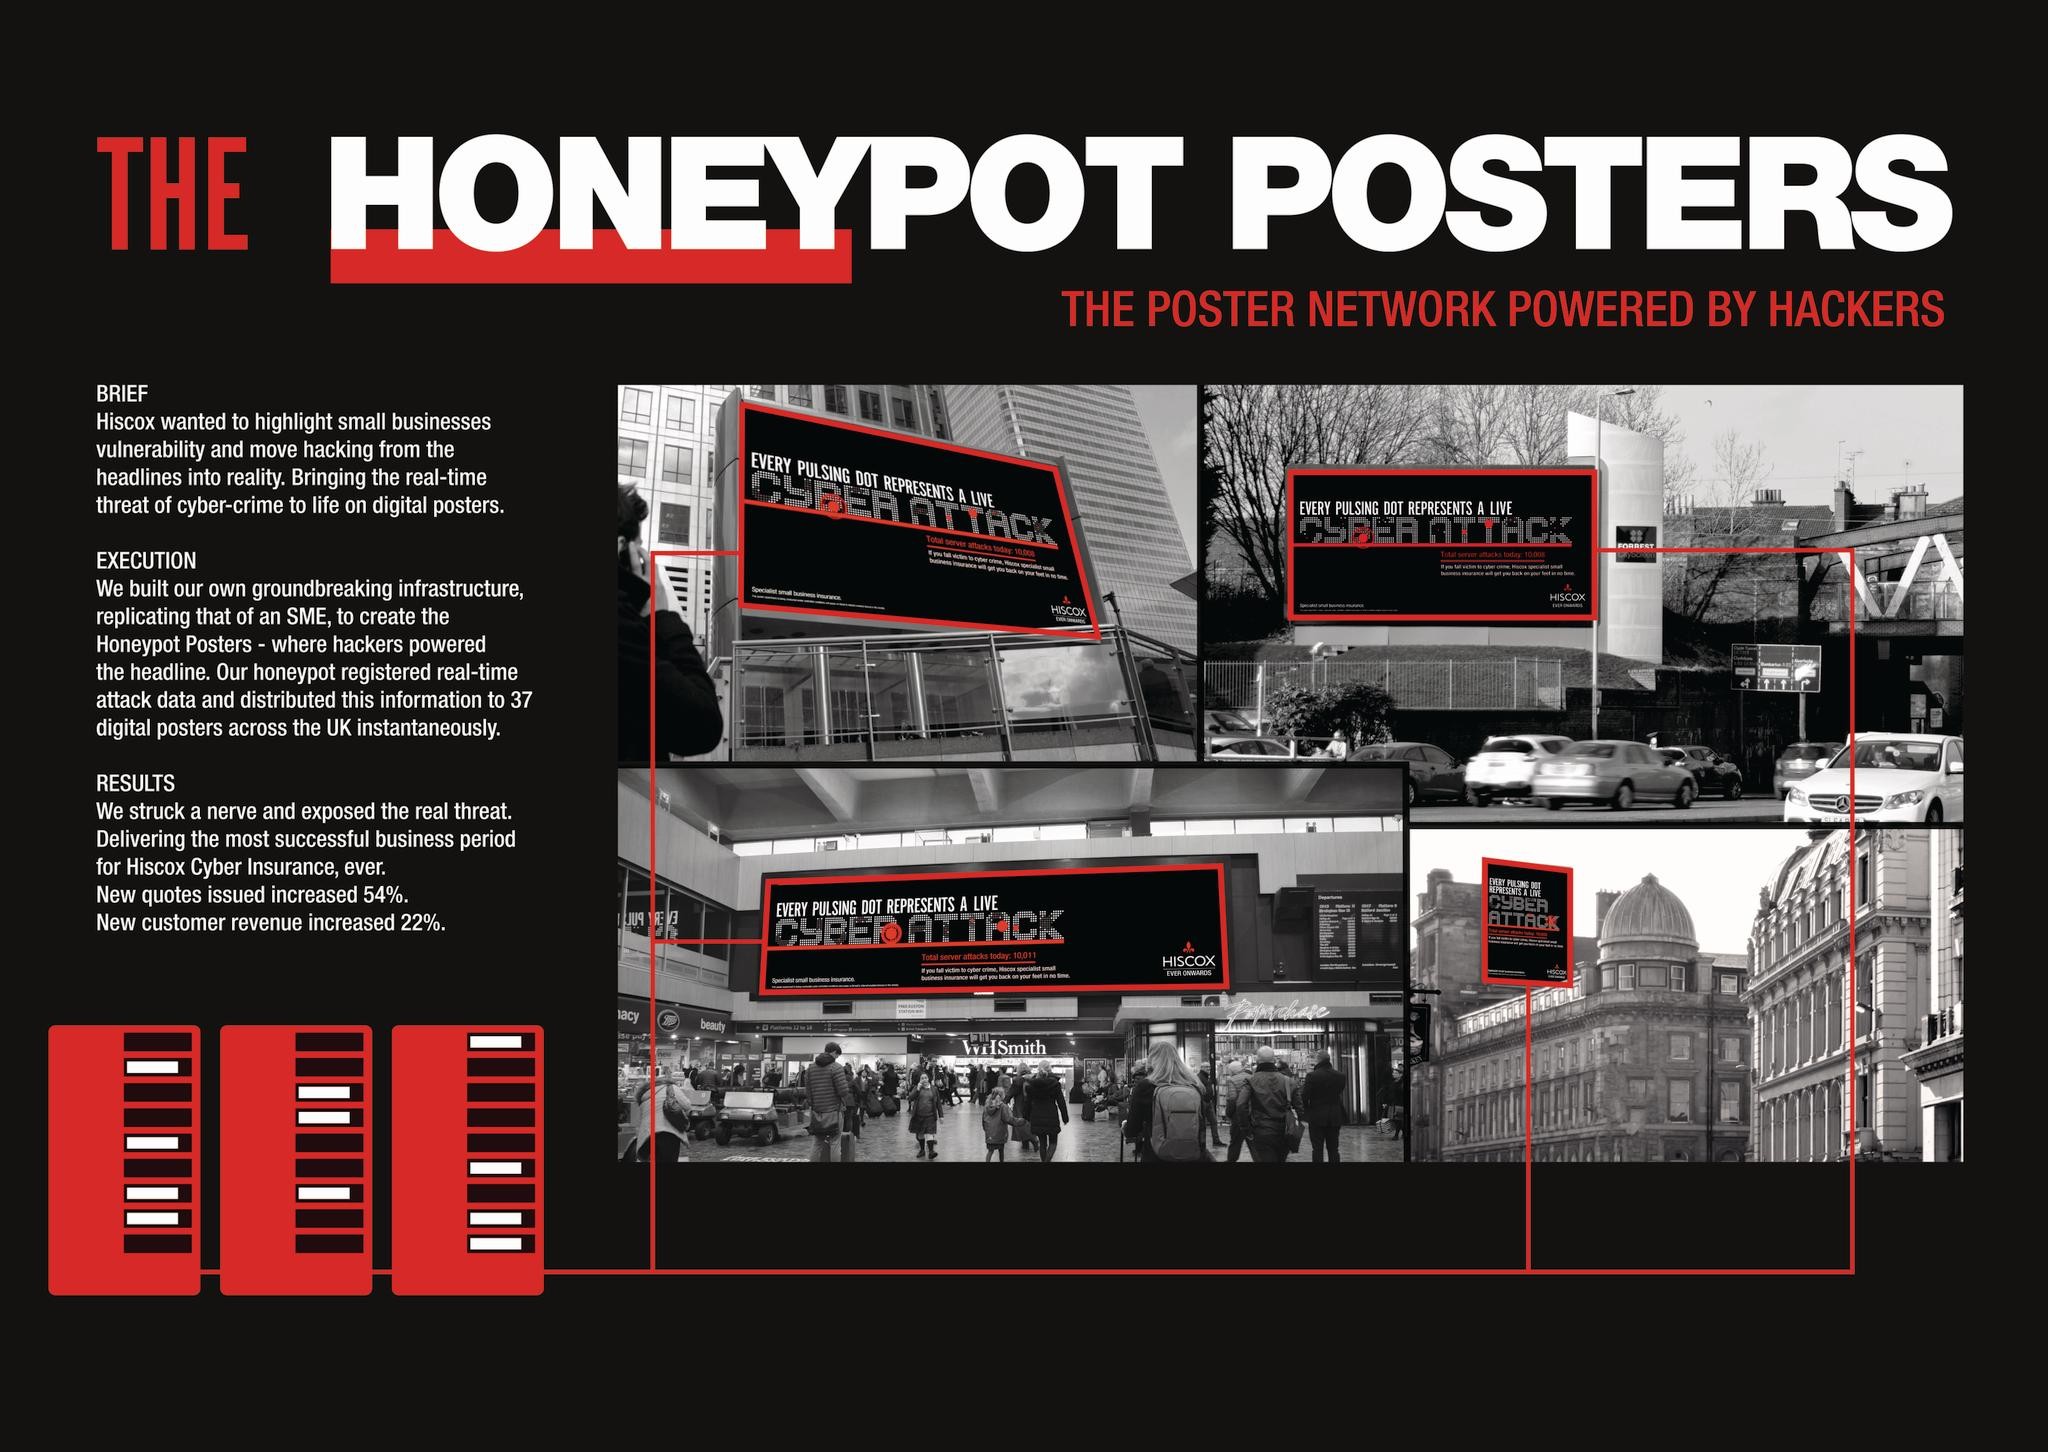 The Honeypot Posters